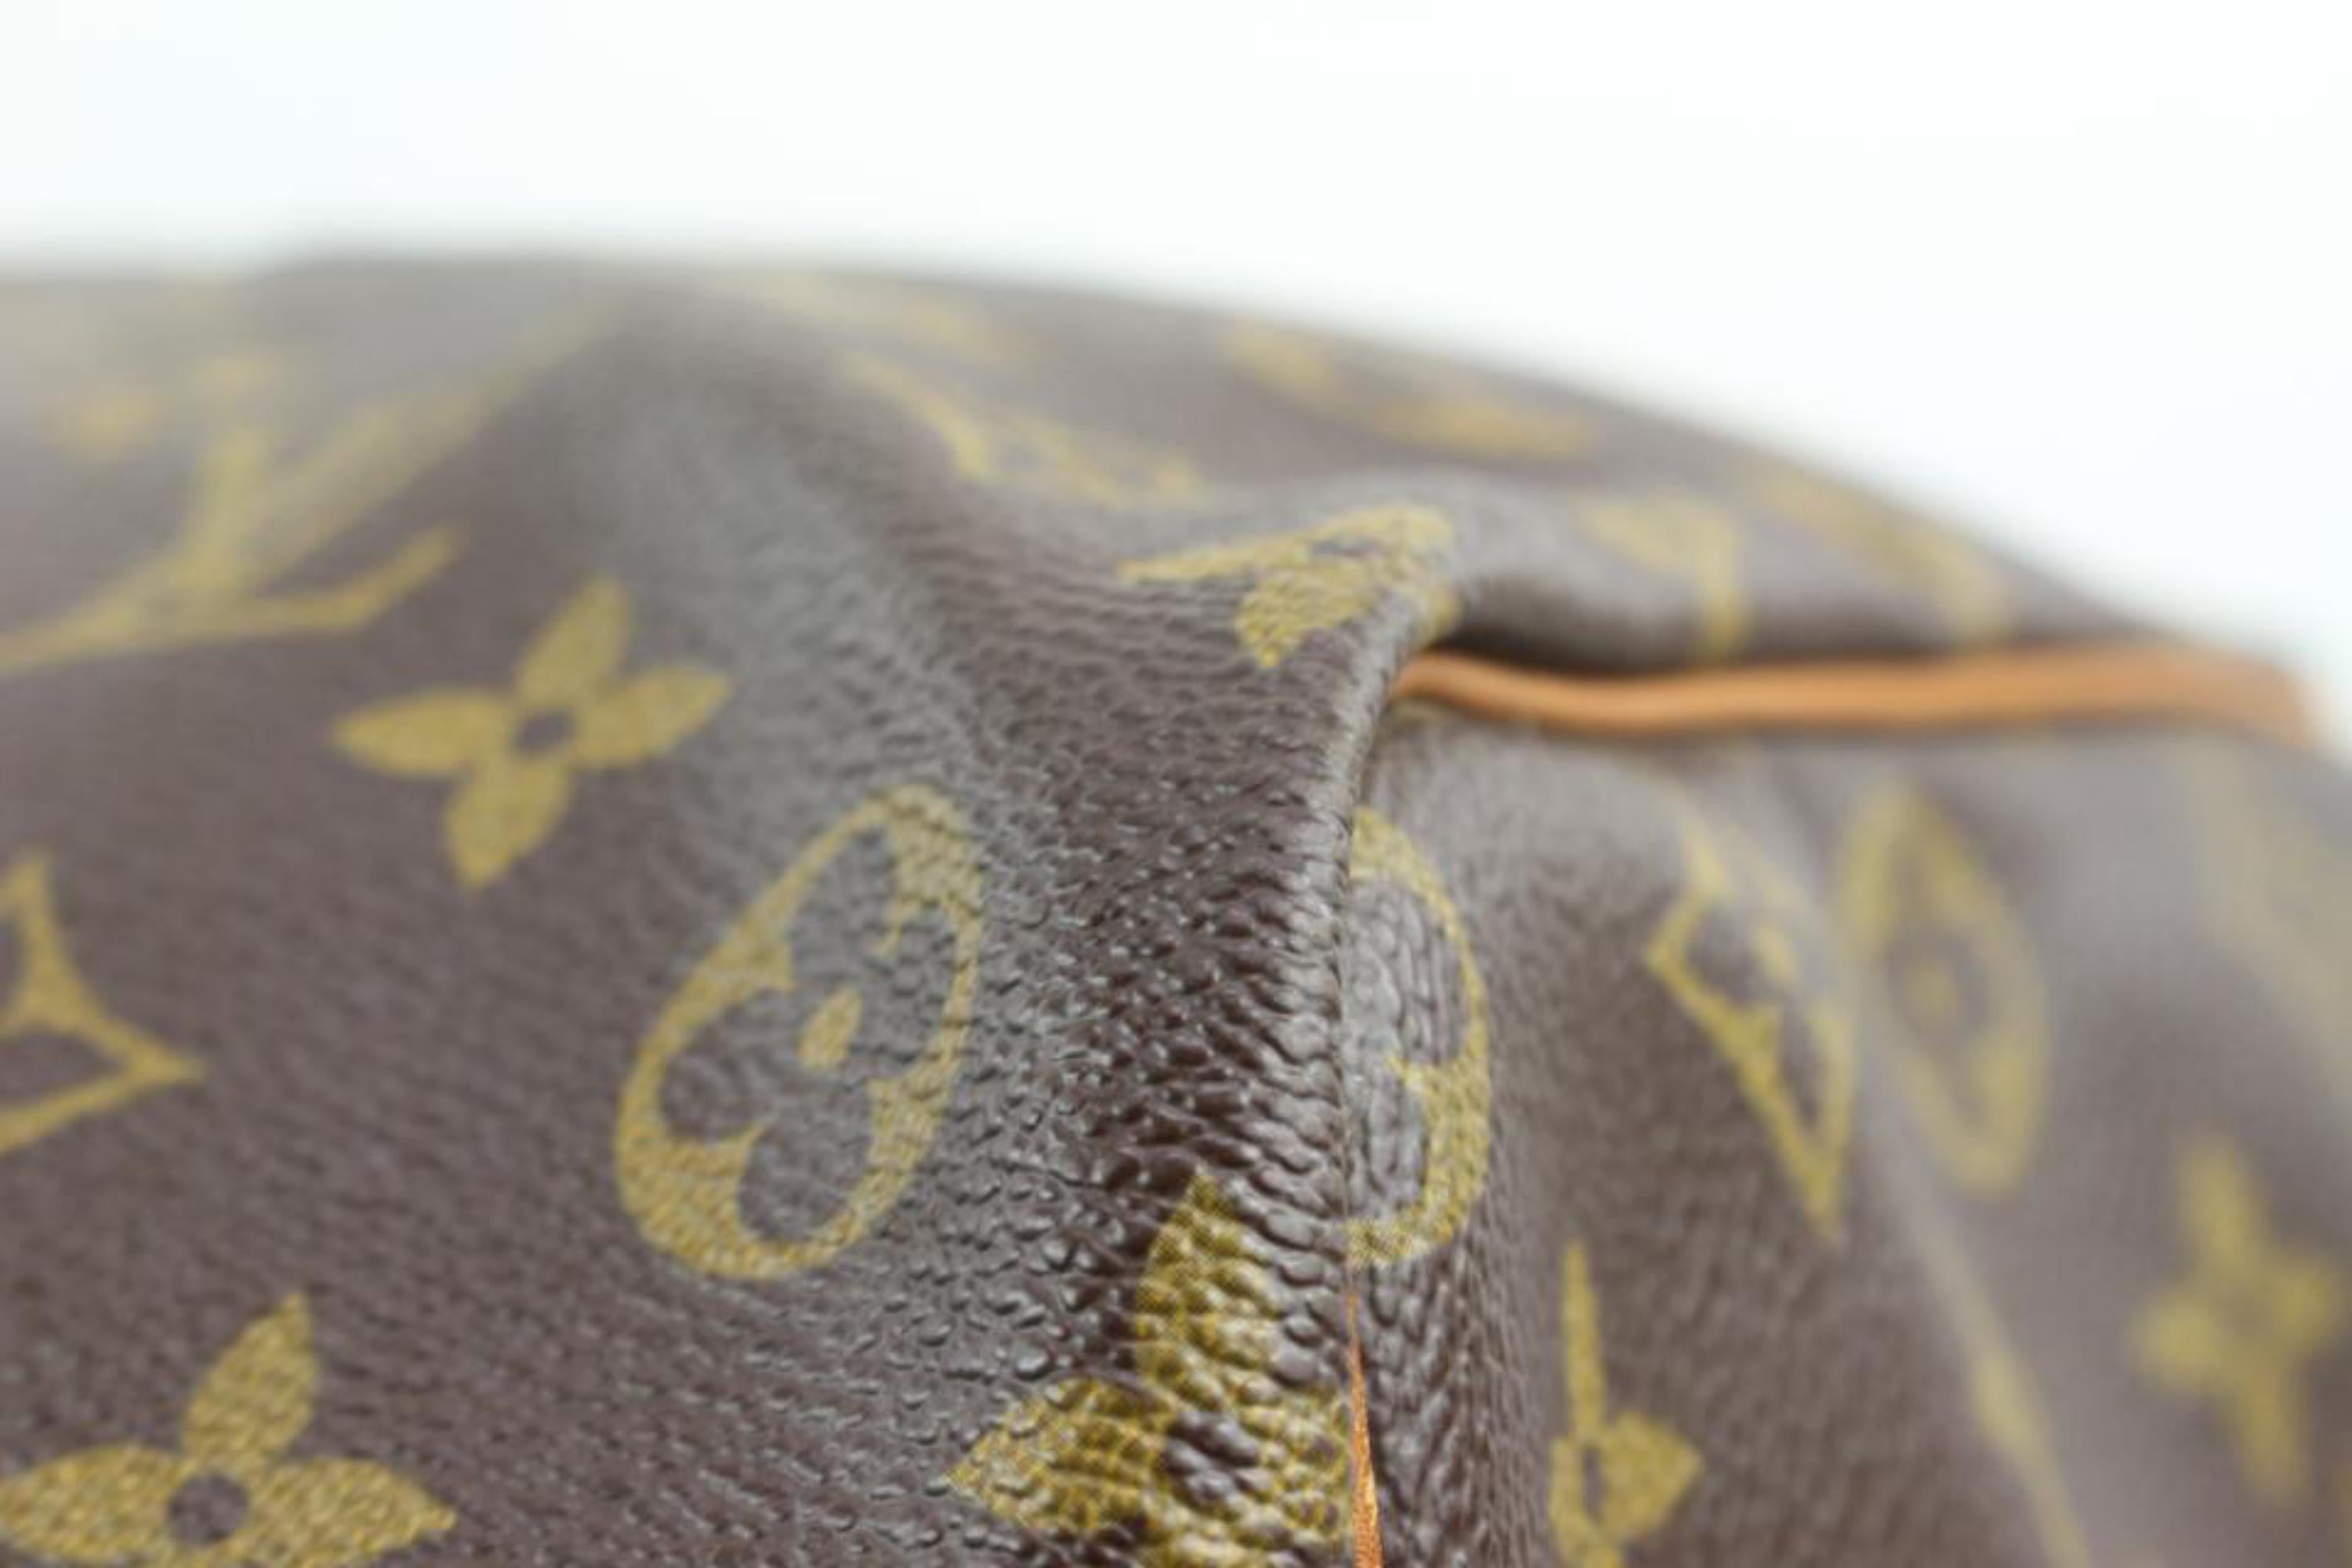 Louis Vuitton Monogram Keepall Bandouliere 60 Duffle Bag with Strap 60lv218s 2